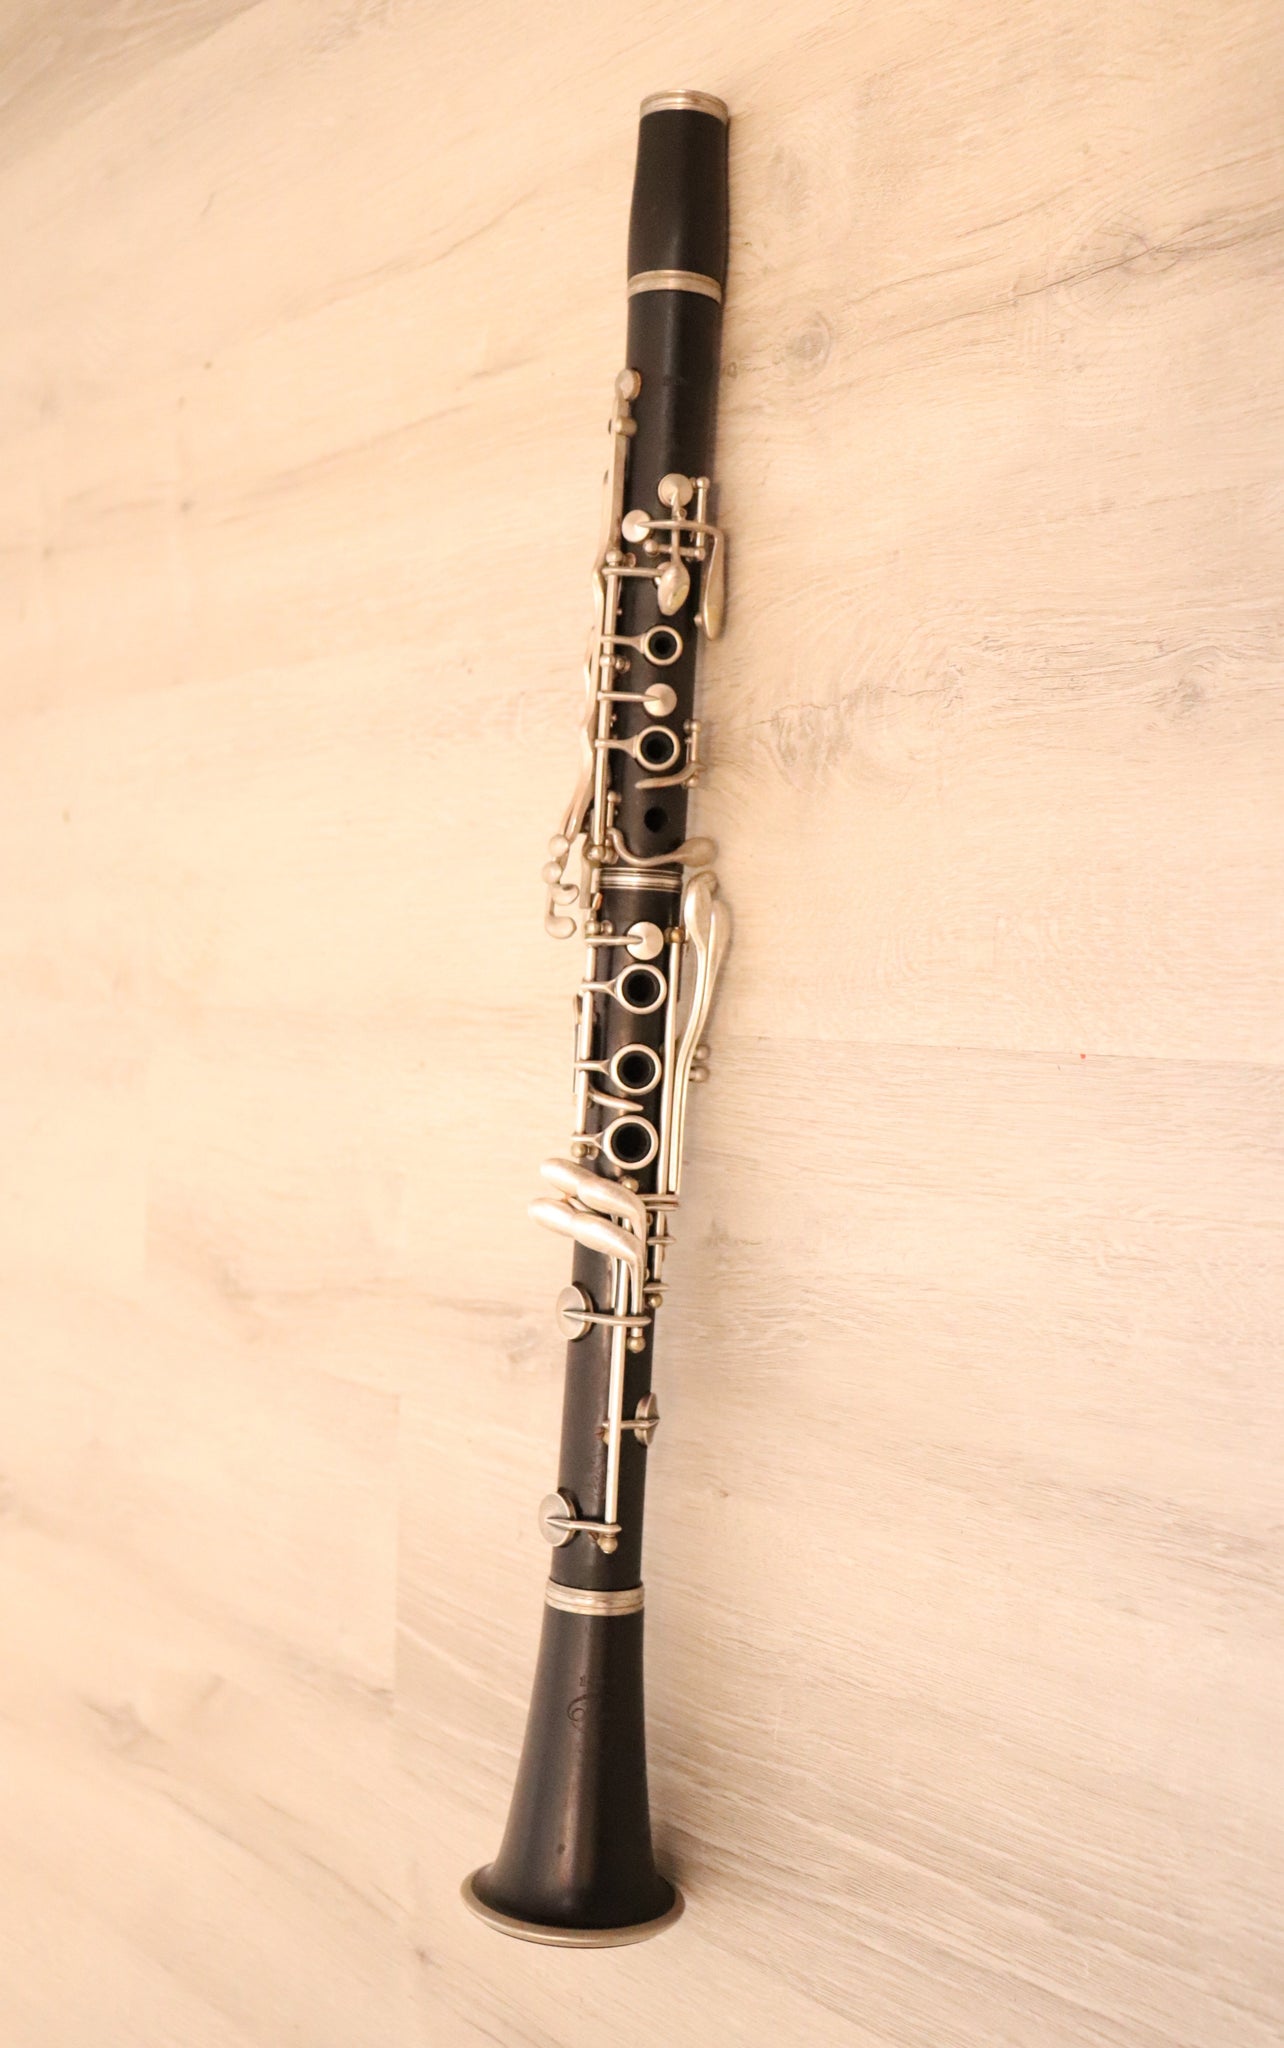 Selmer Signet 100 Clarinet (Free Shipping Lower 48 States) – Bored 